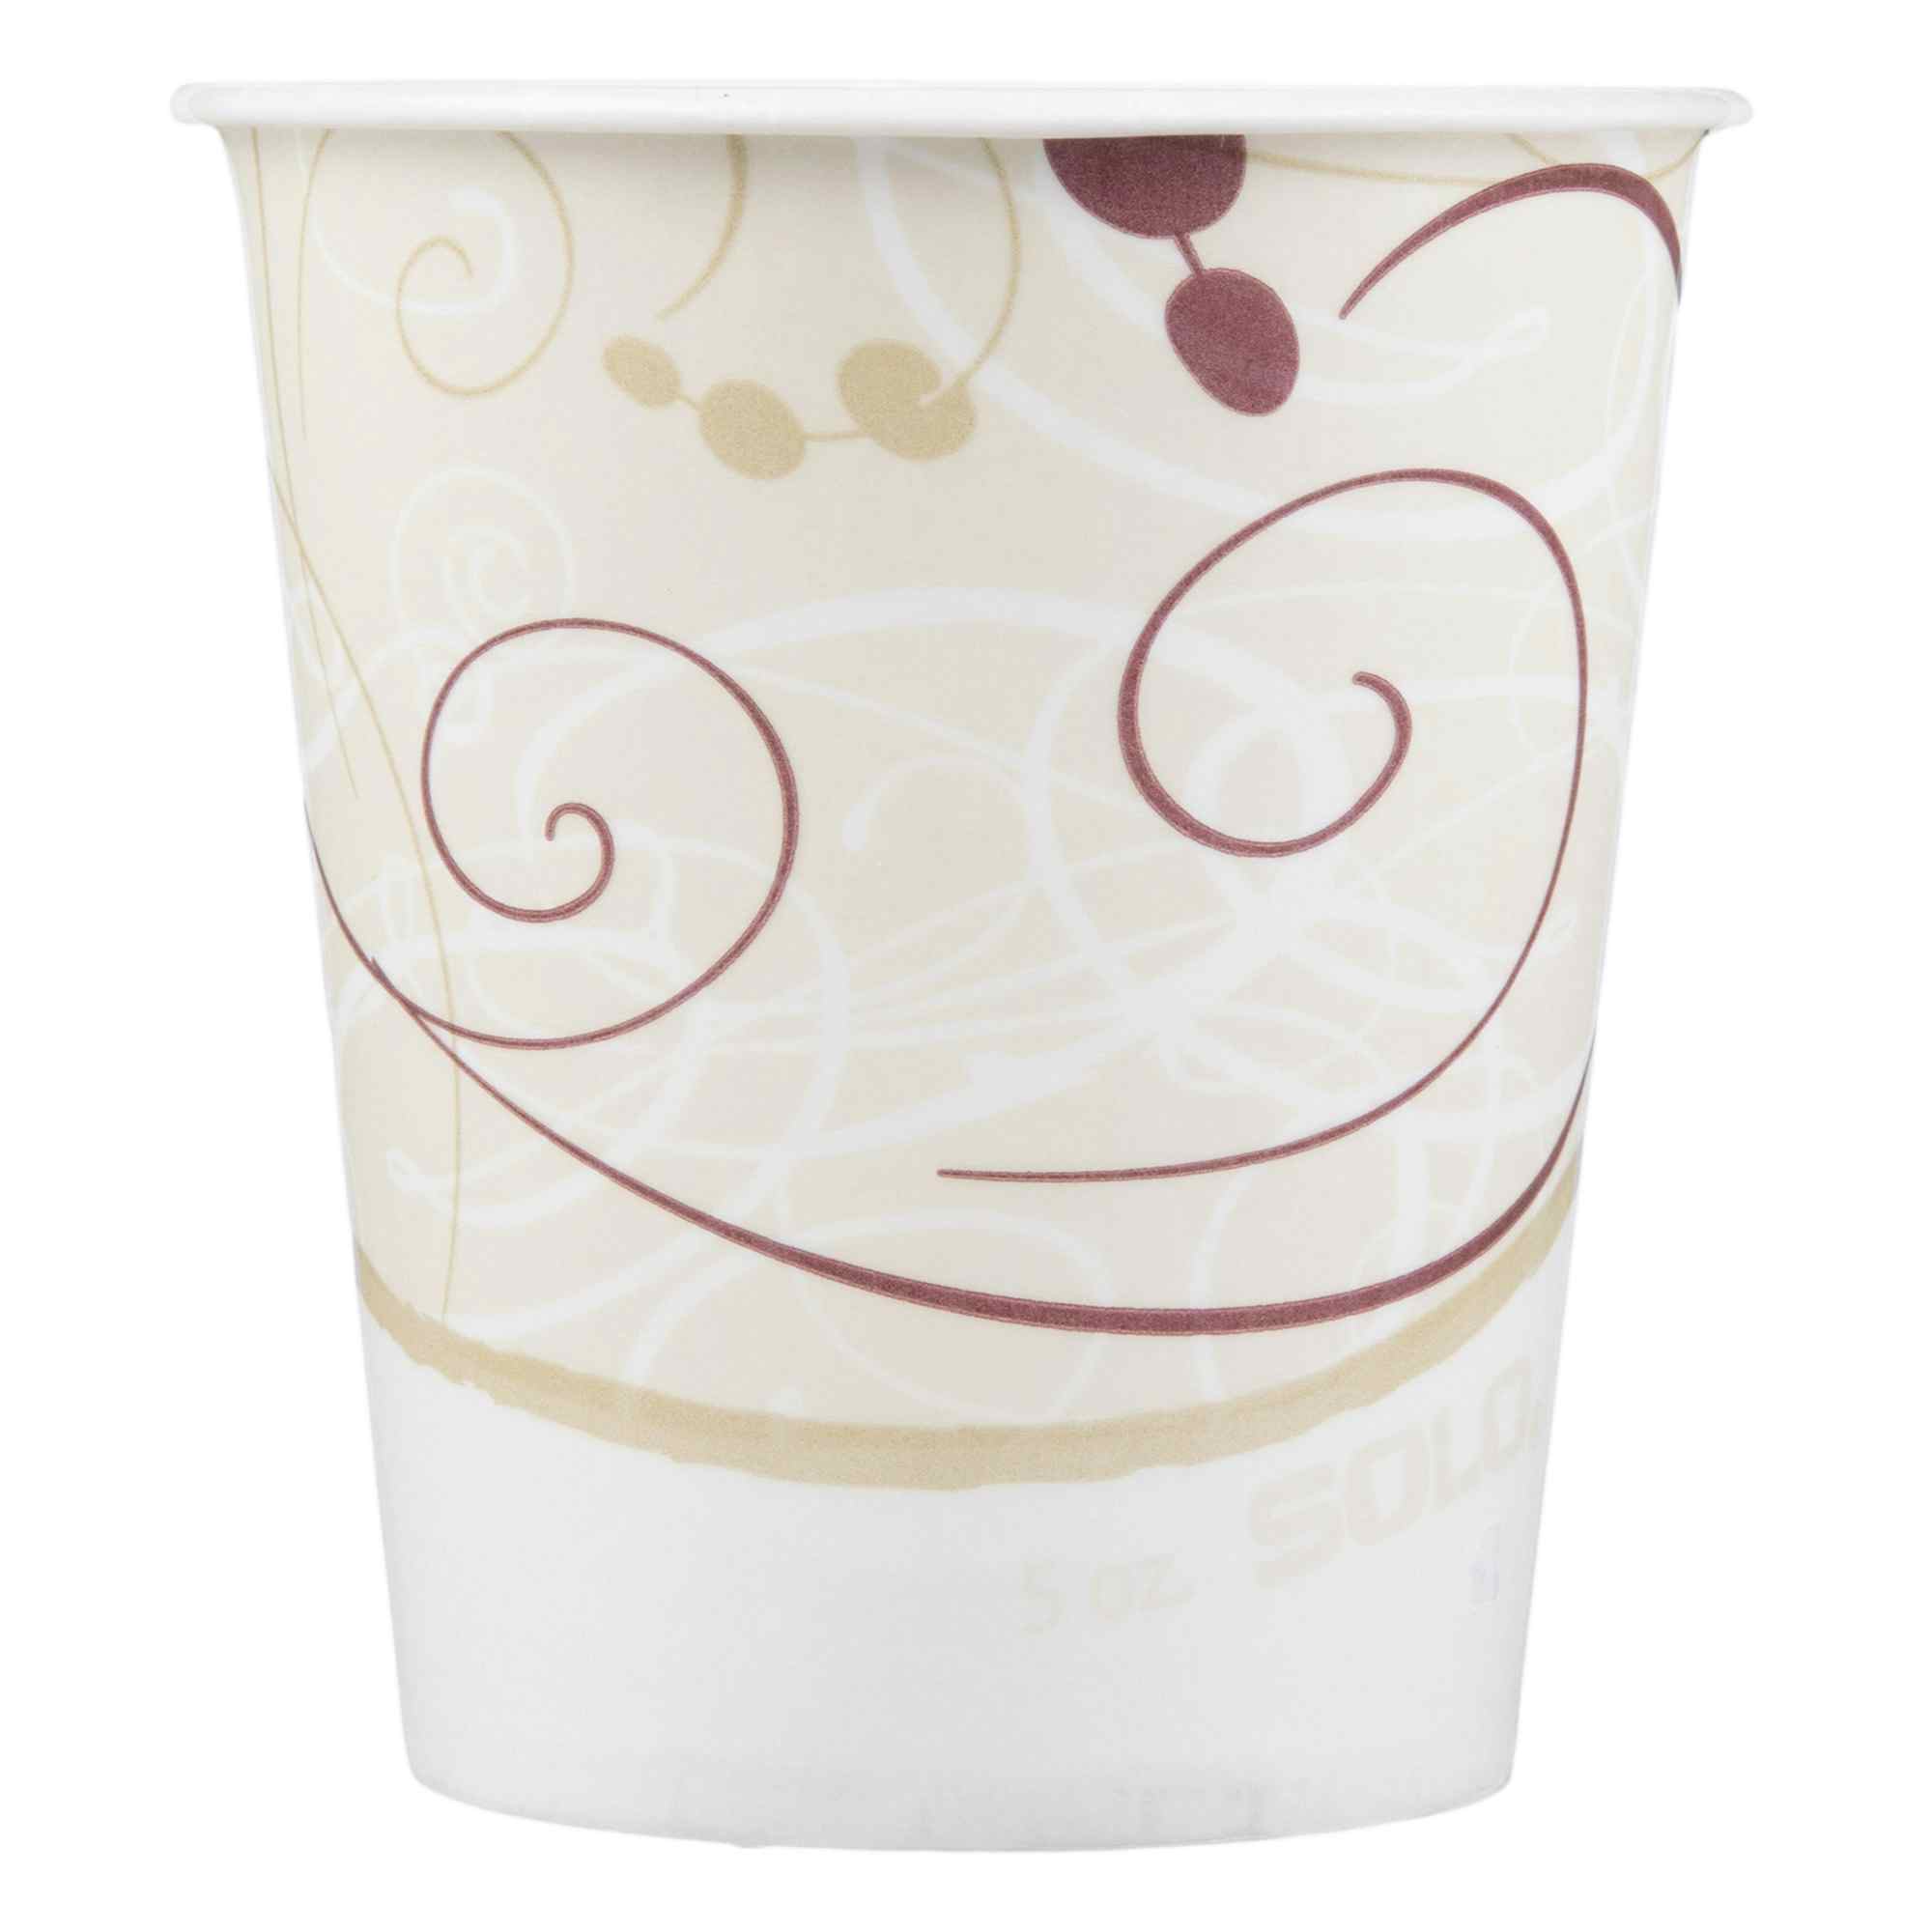 Solo Disposable Paper Drinking Cup, Symphony Print, R53-J8000, 5 oz - Case of 3000